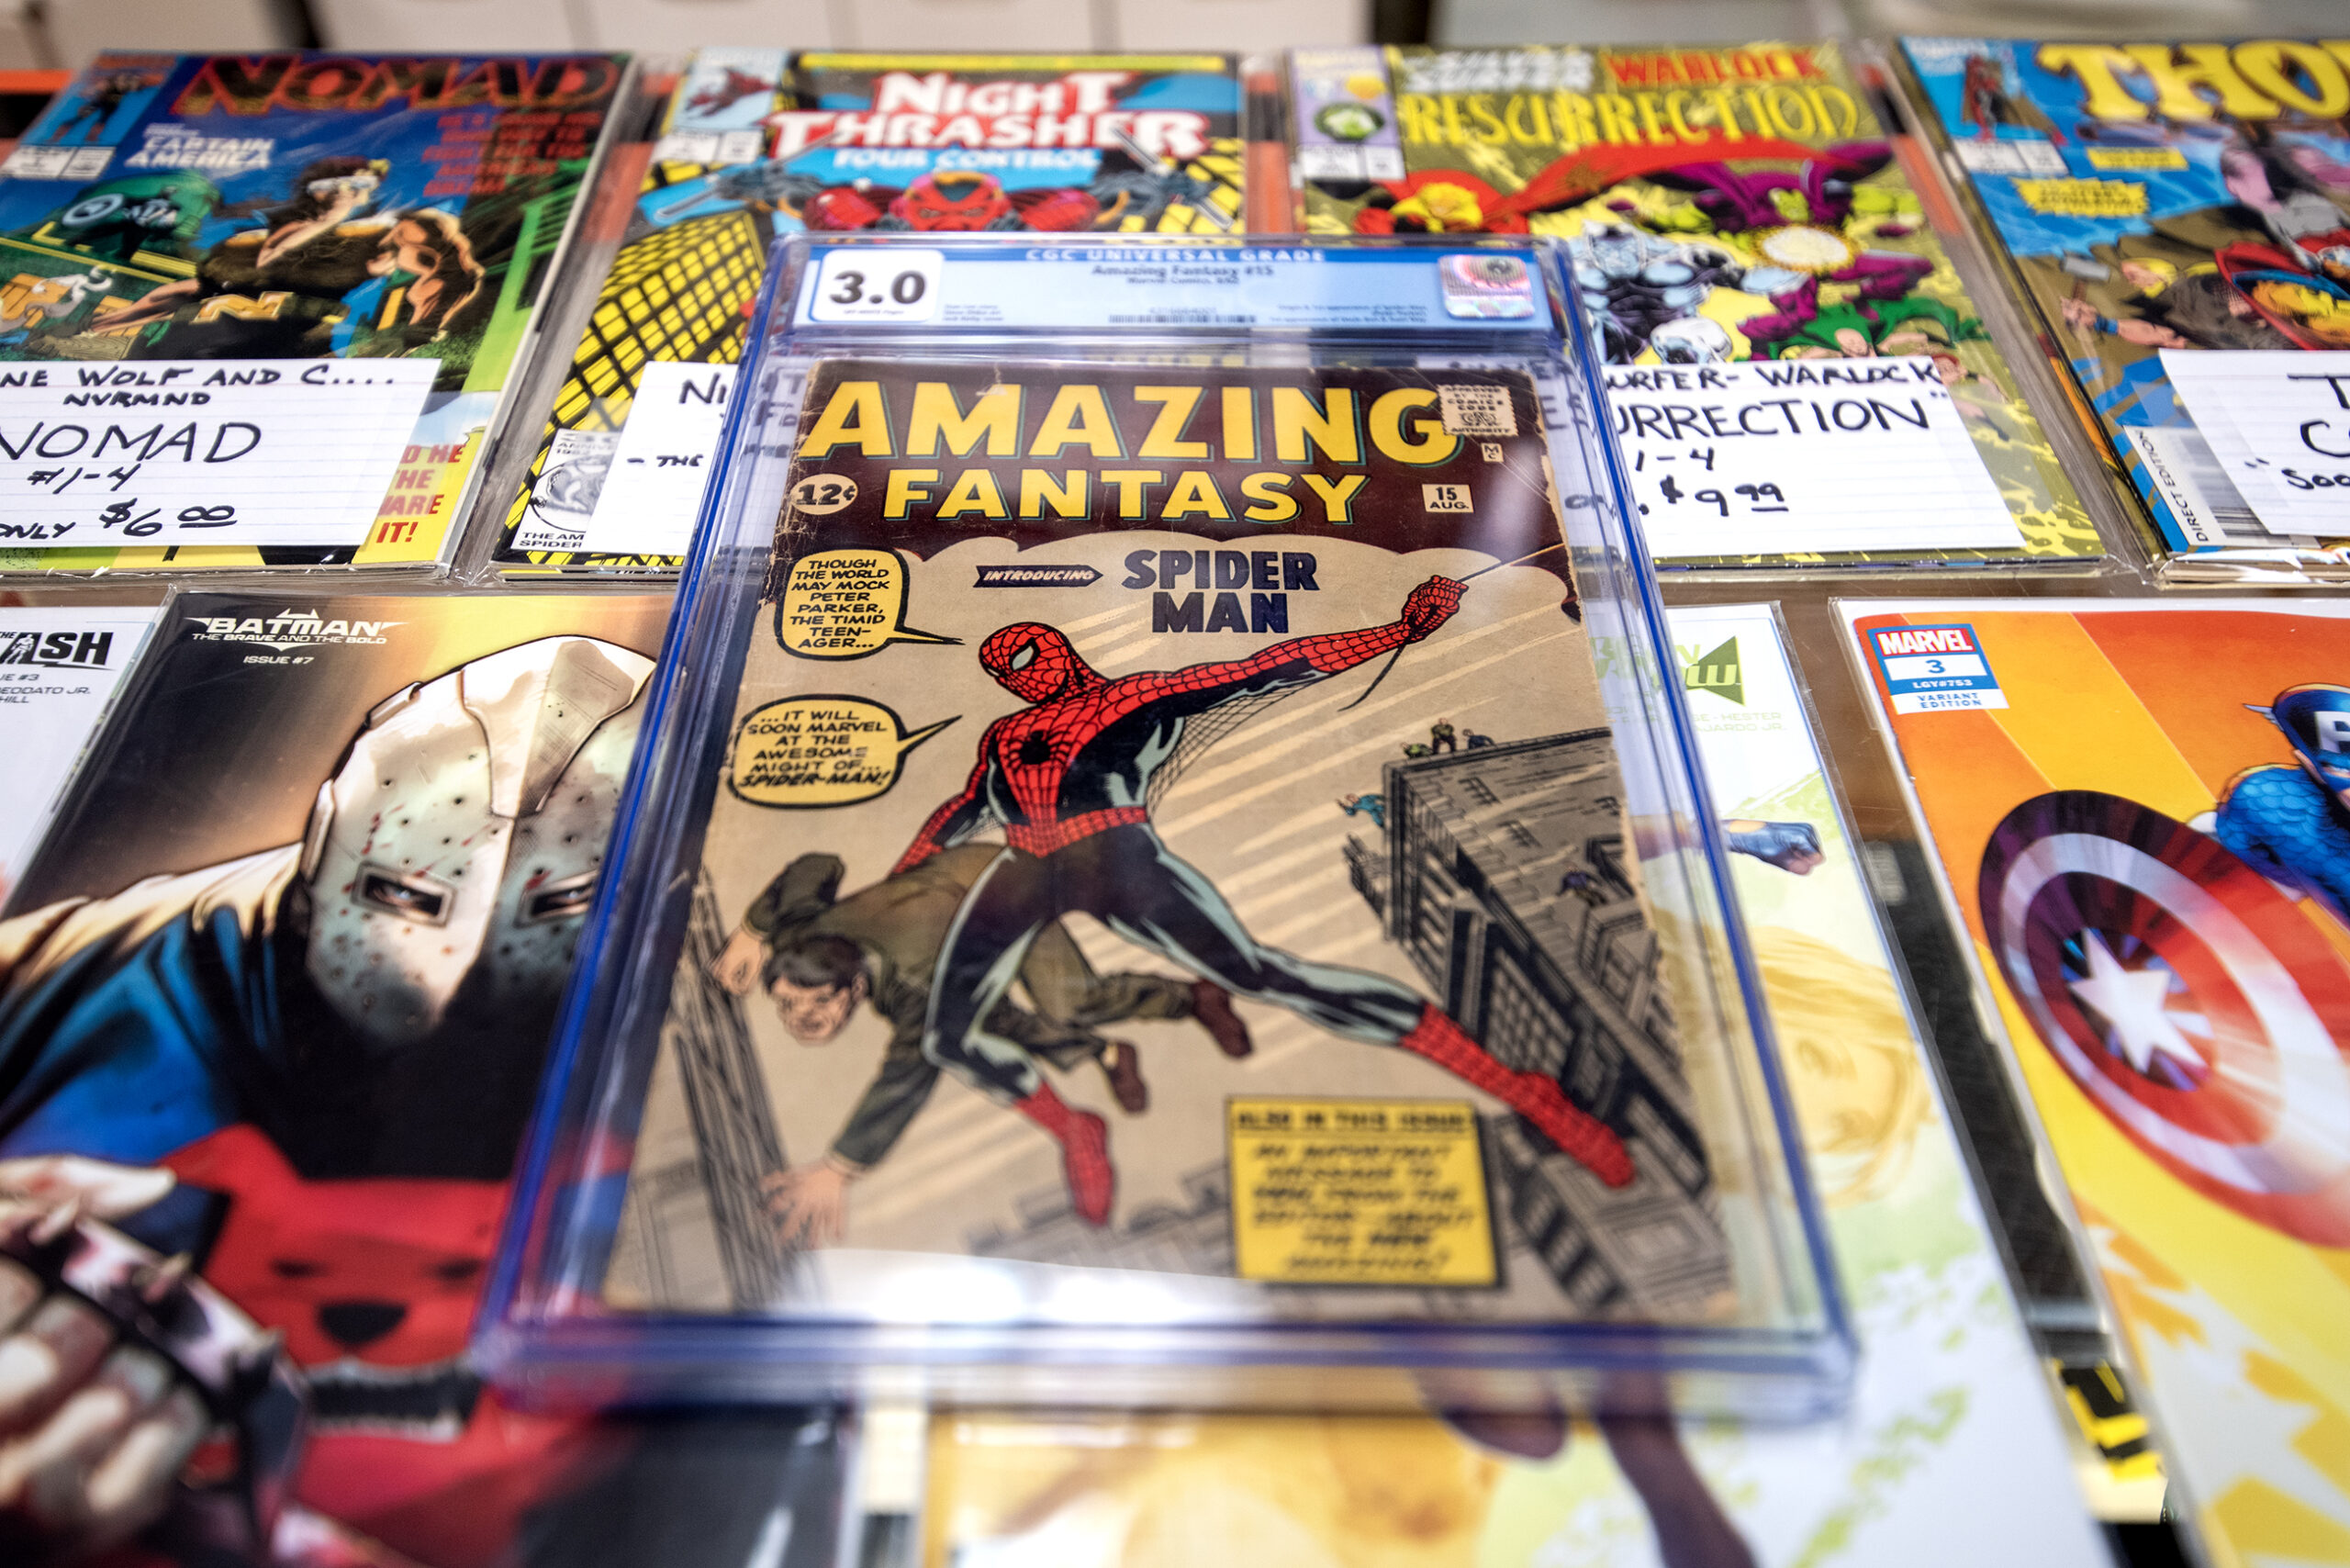 A comic book is kept in a protective case. Spiderman can be seen on the cover.